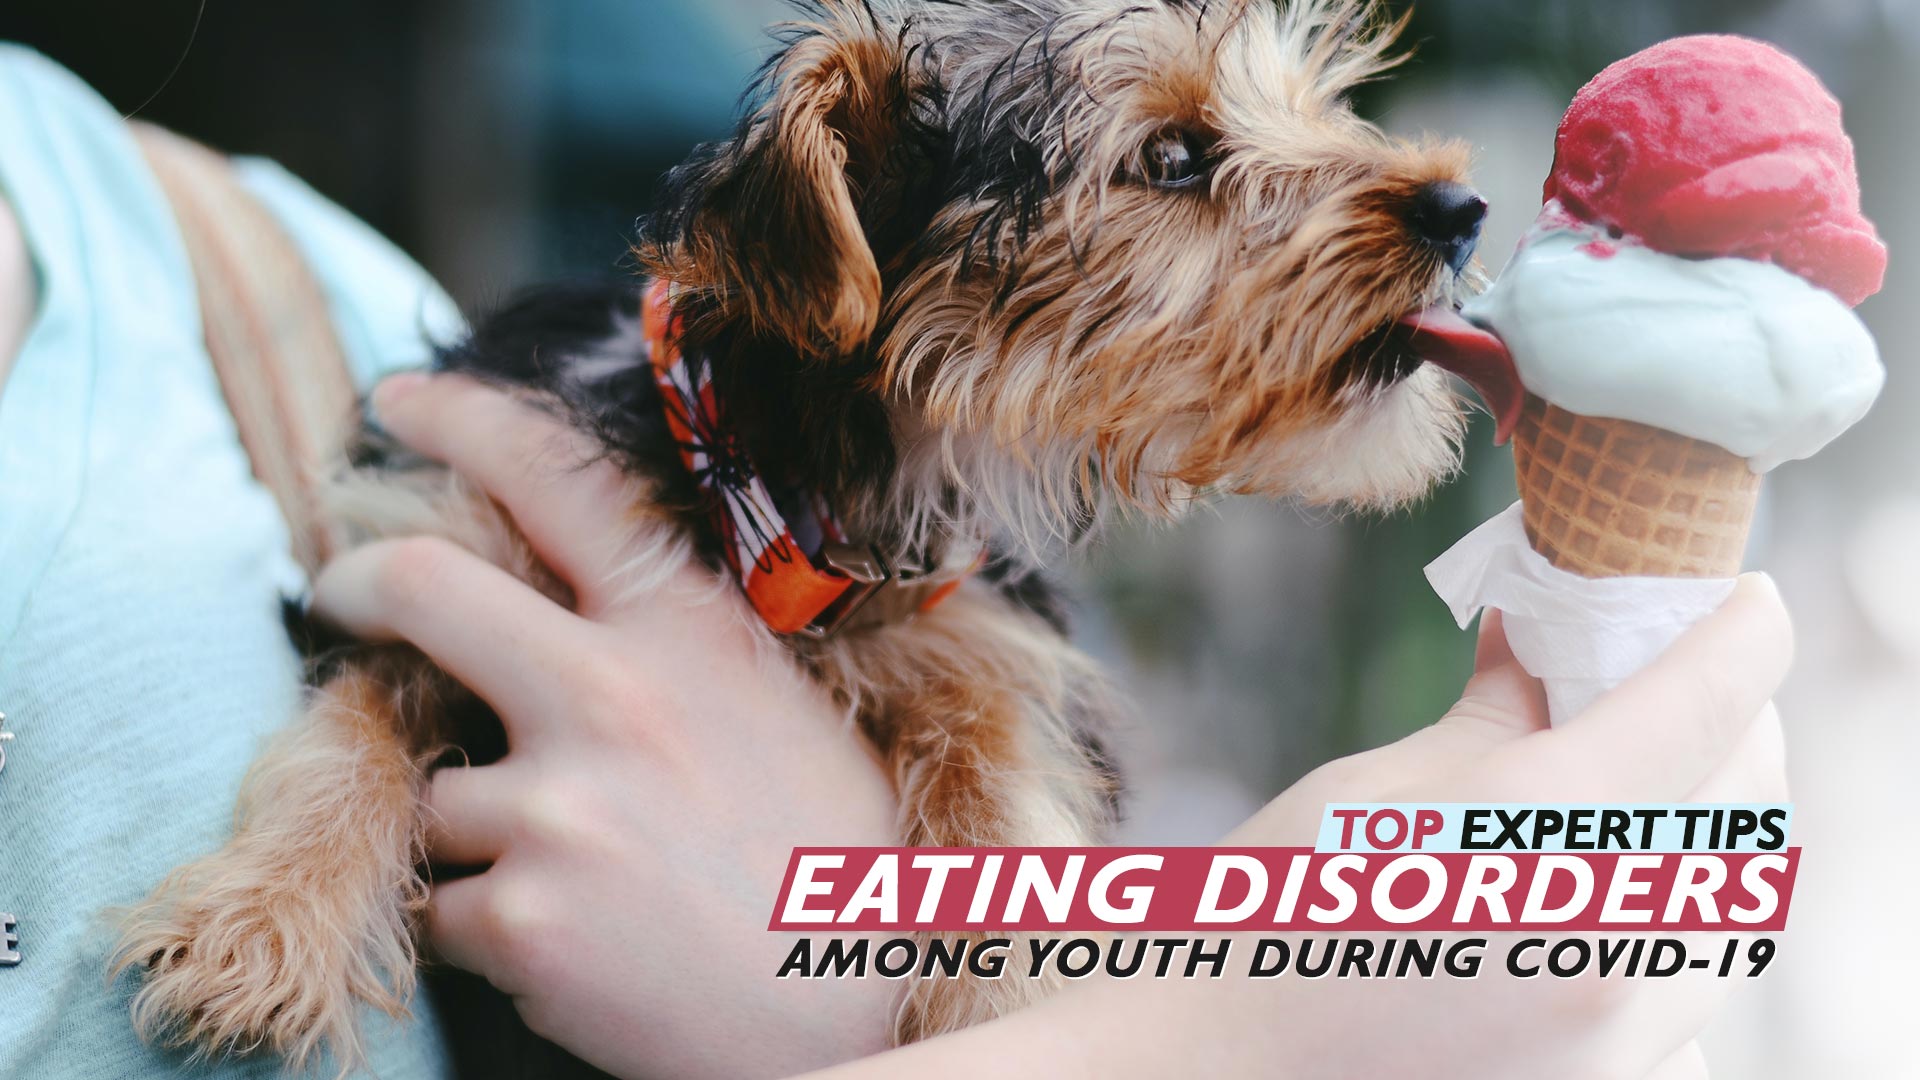 Top Expert Tips | Eating Disorders Among Youth During COVID-19